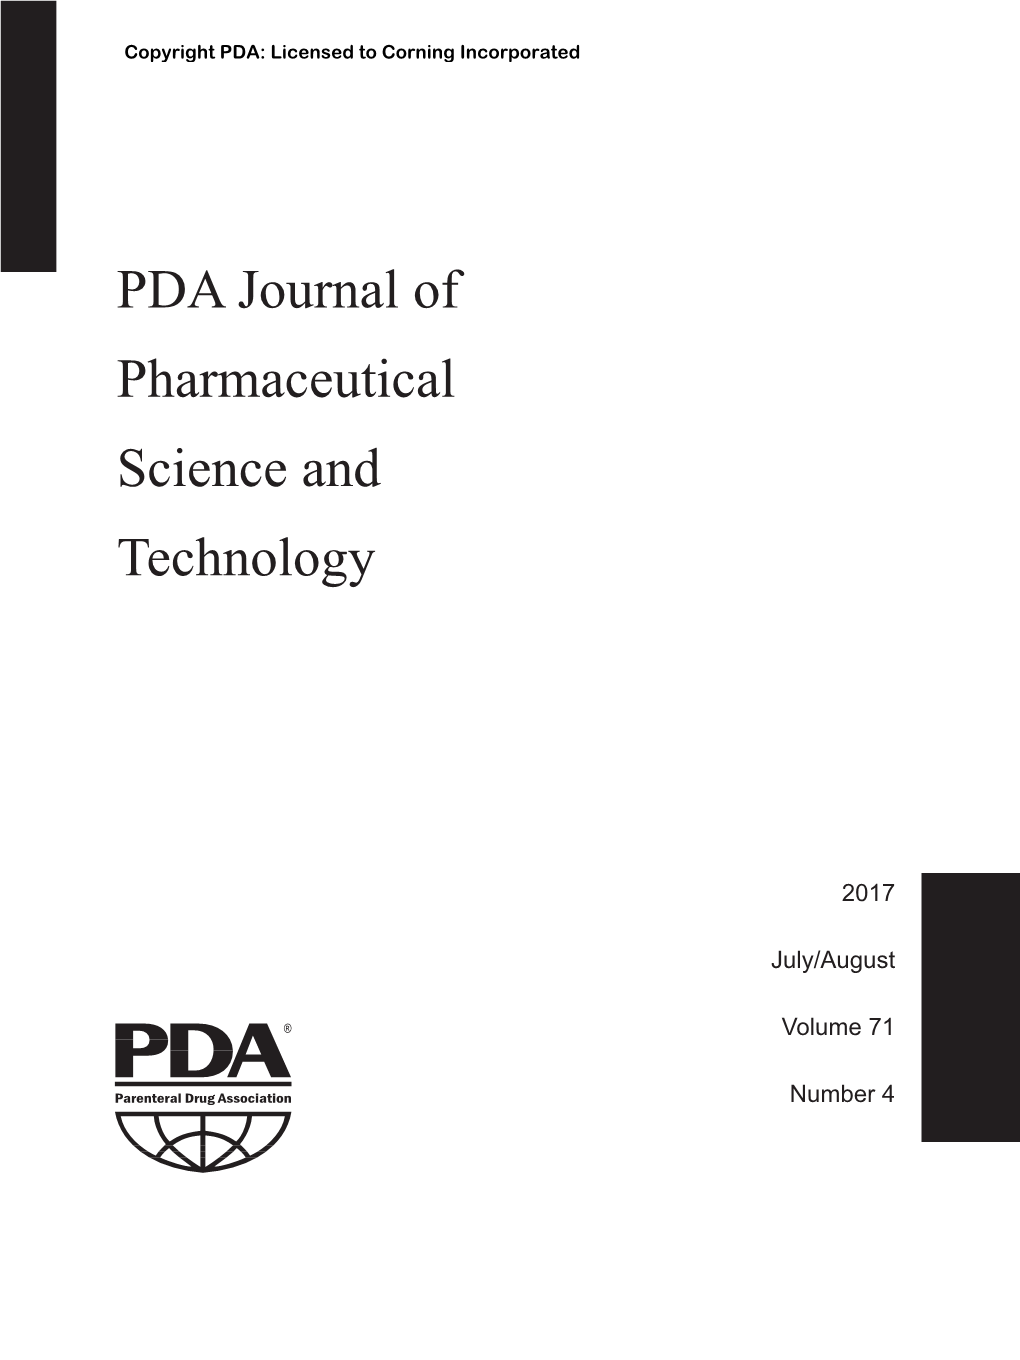 PDA Journal of Pharmaceutical Science and Technology